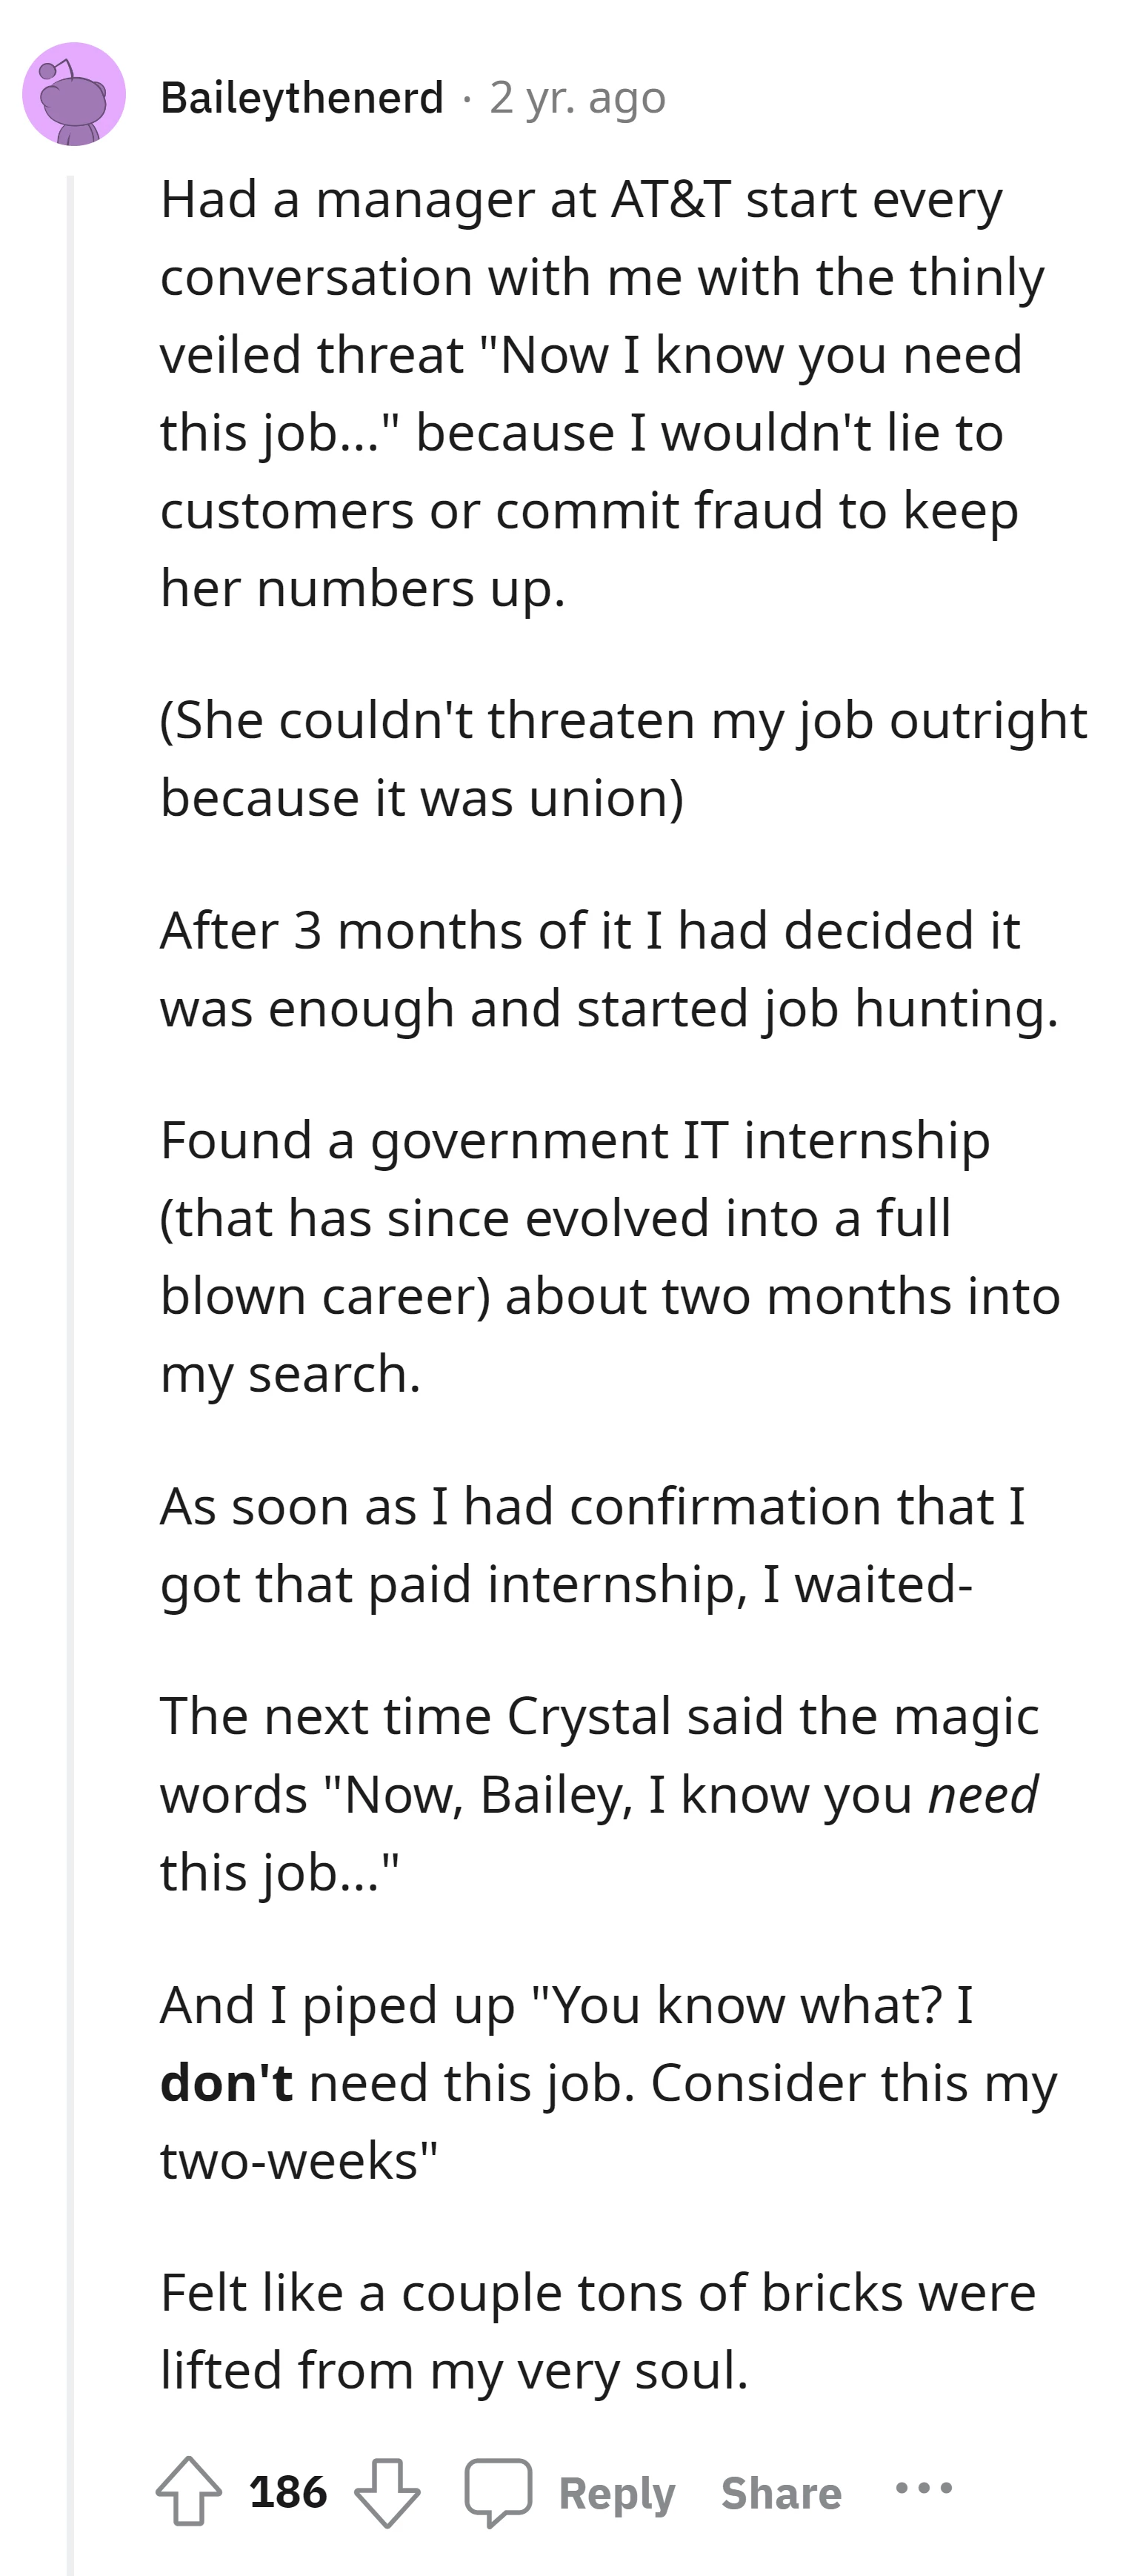 This Redditor, protected by a union, ultimately found relief by securing a government IT internship